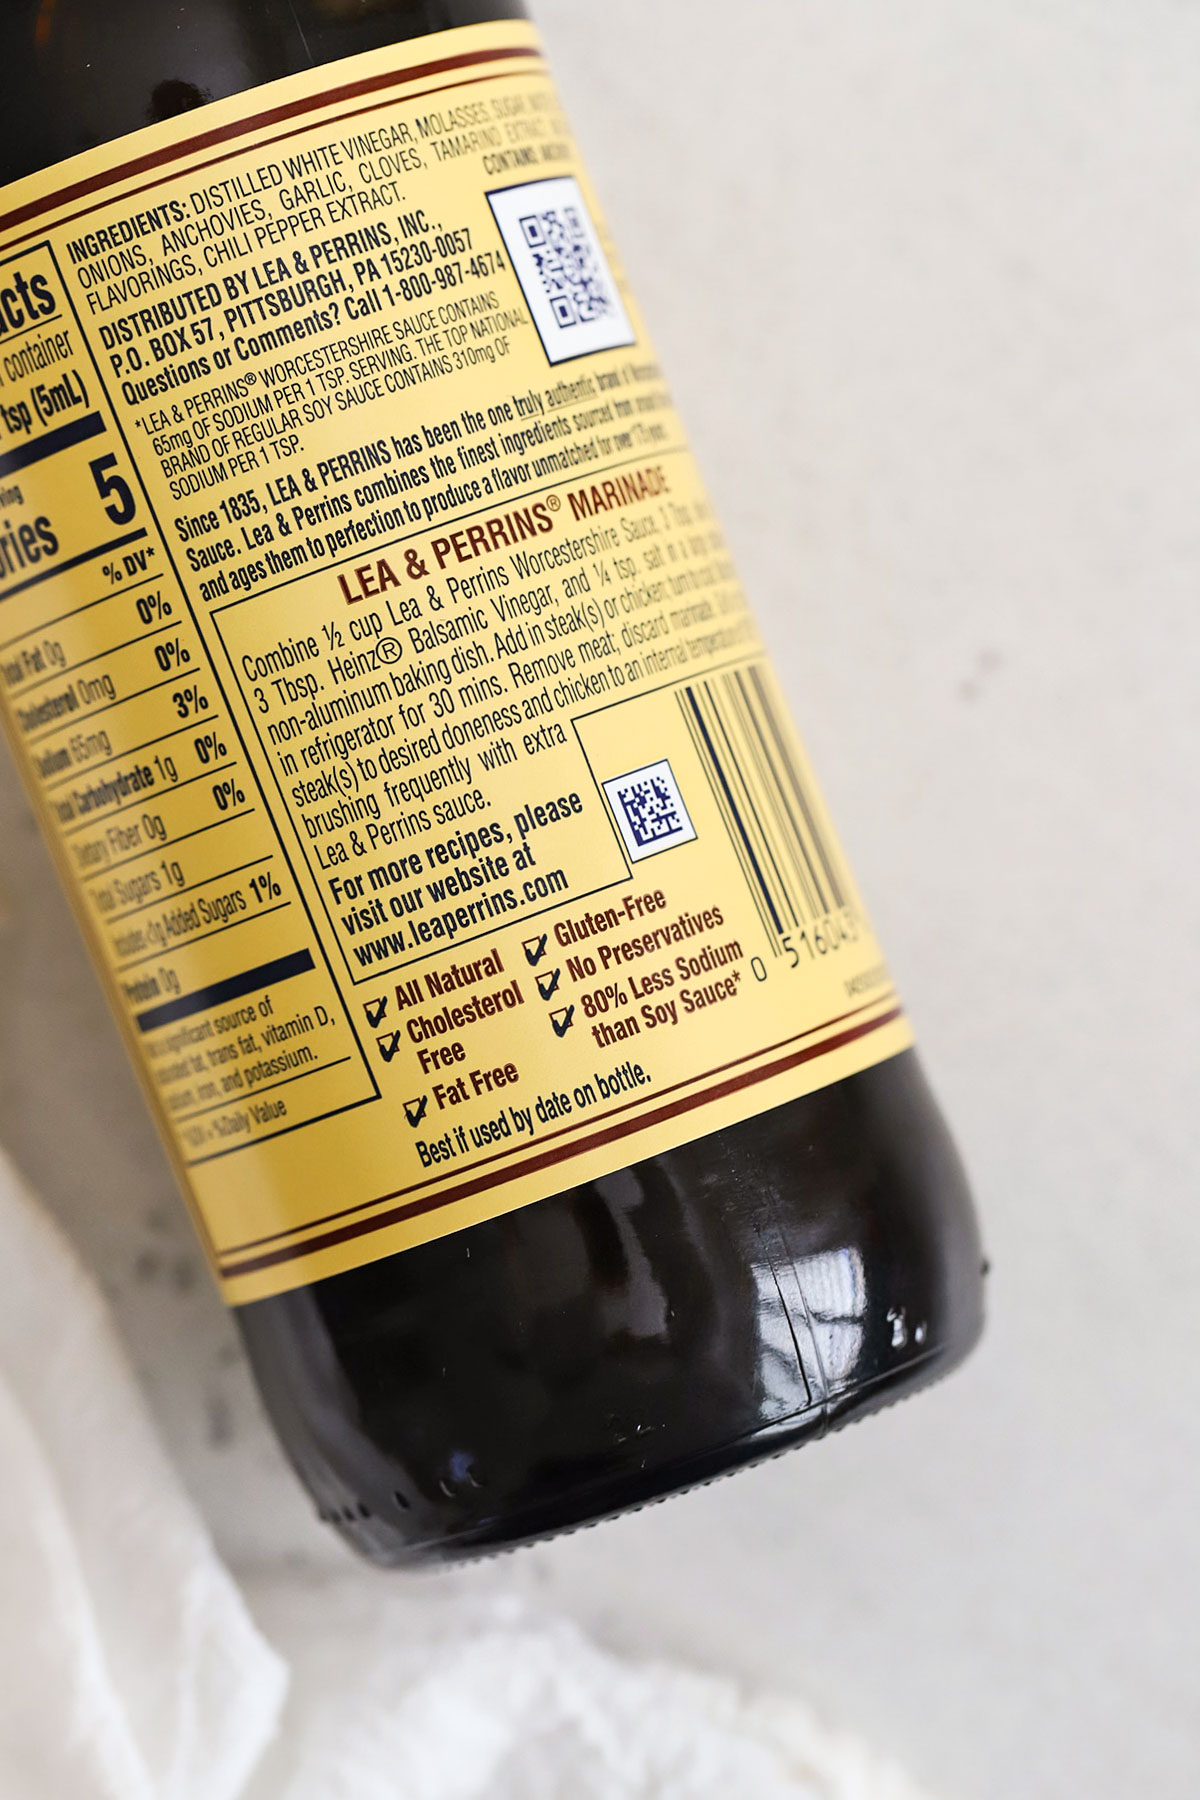 close up look at Lea & Perrins allergy label